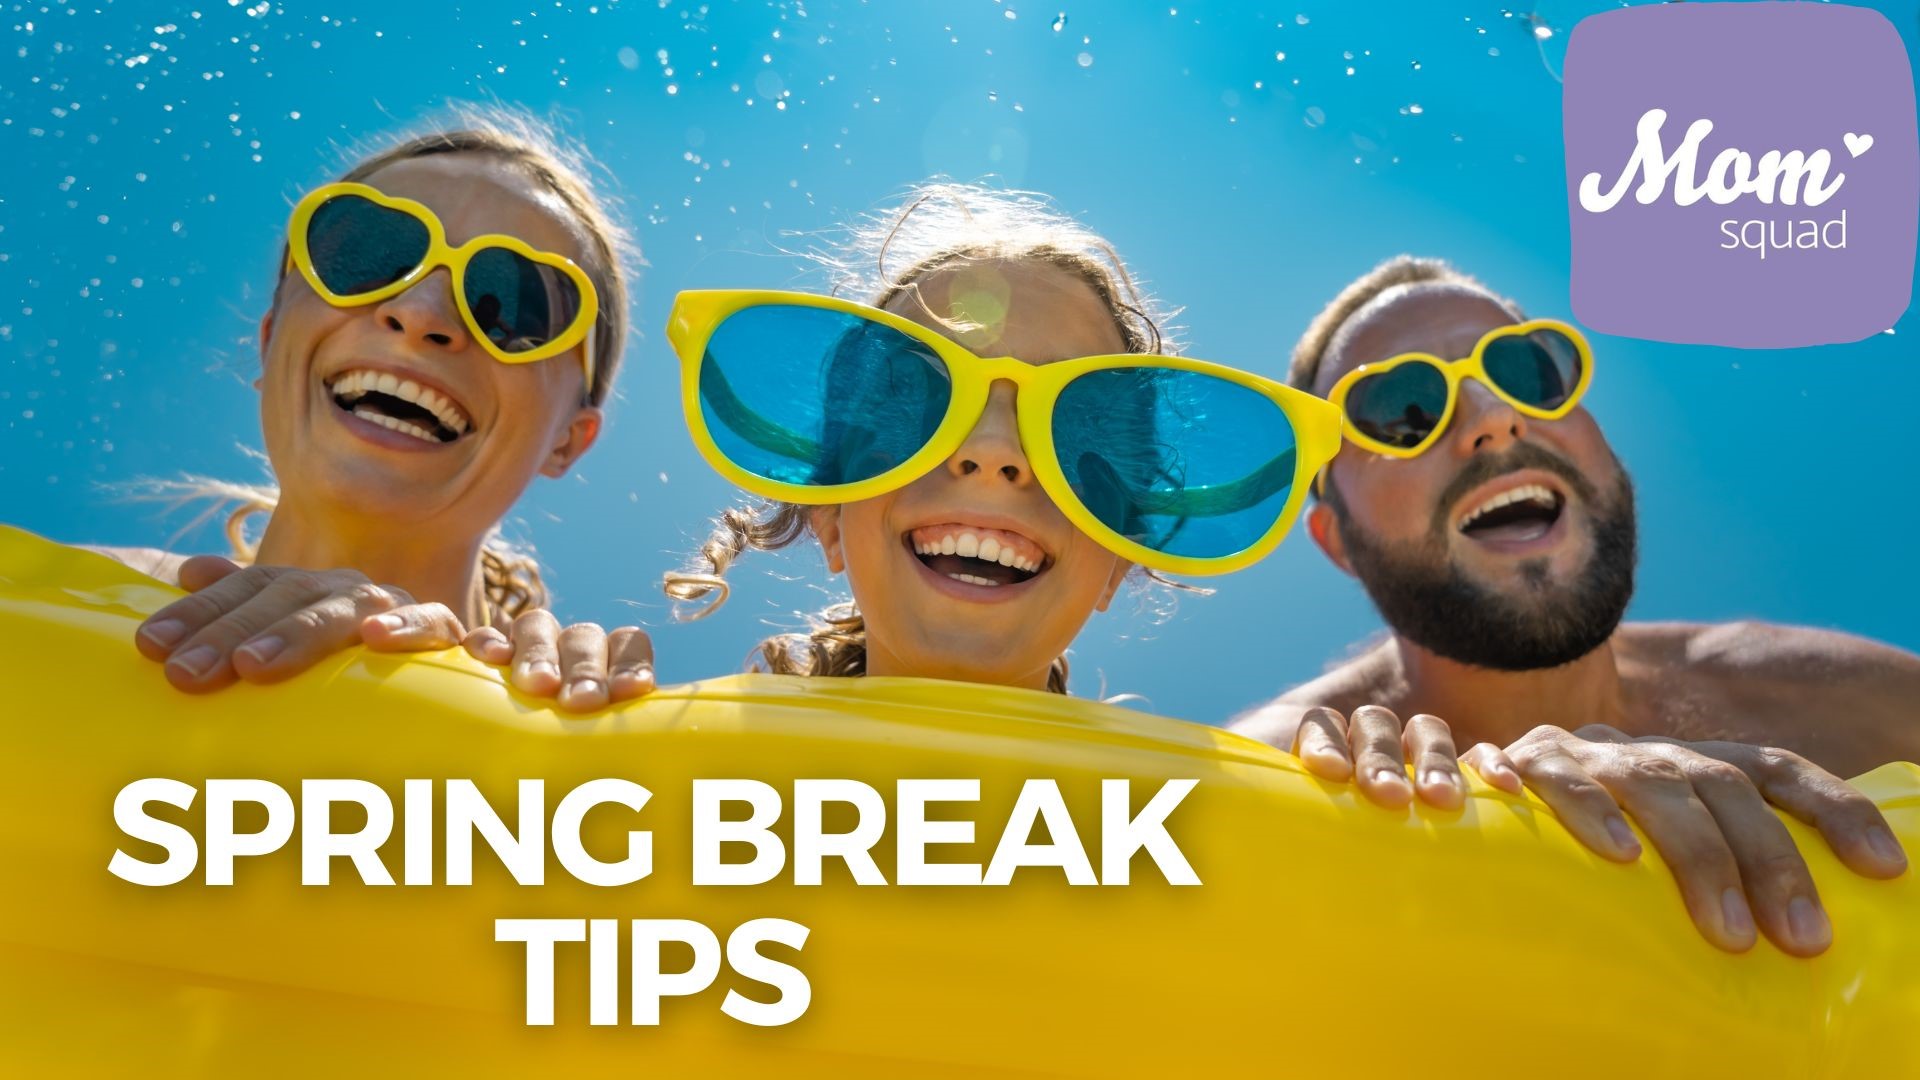 Tips for any spring break, whether you have a staycation or travel to a destination. Advice for how to pack and keep kids entertained, plus Easter gift ideas.